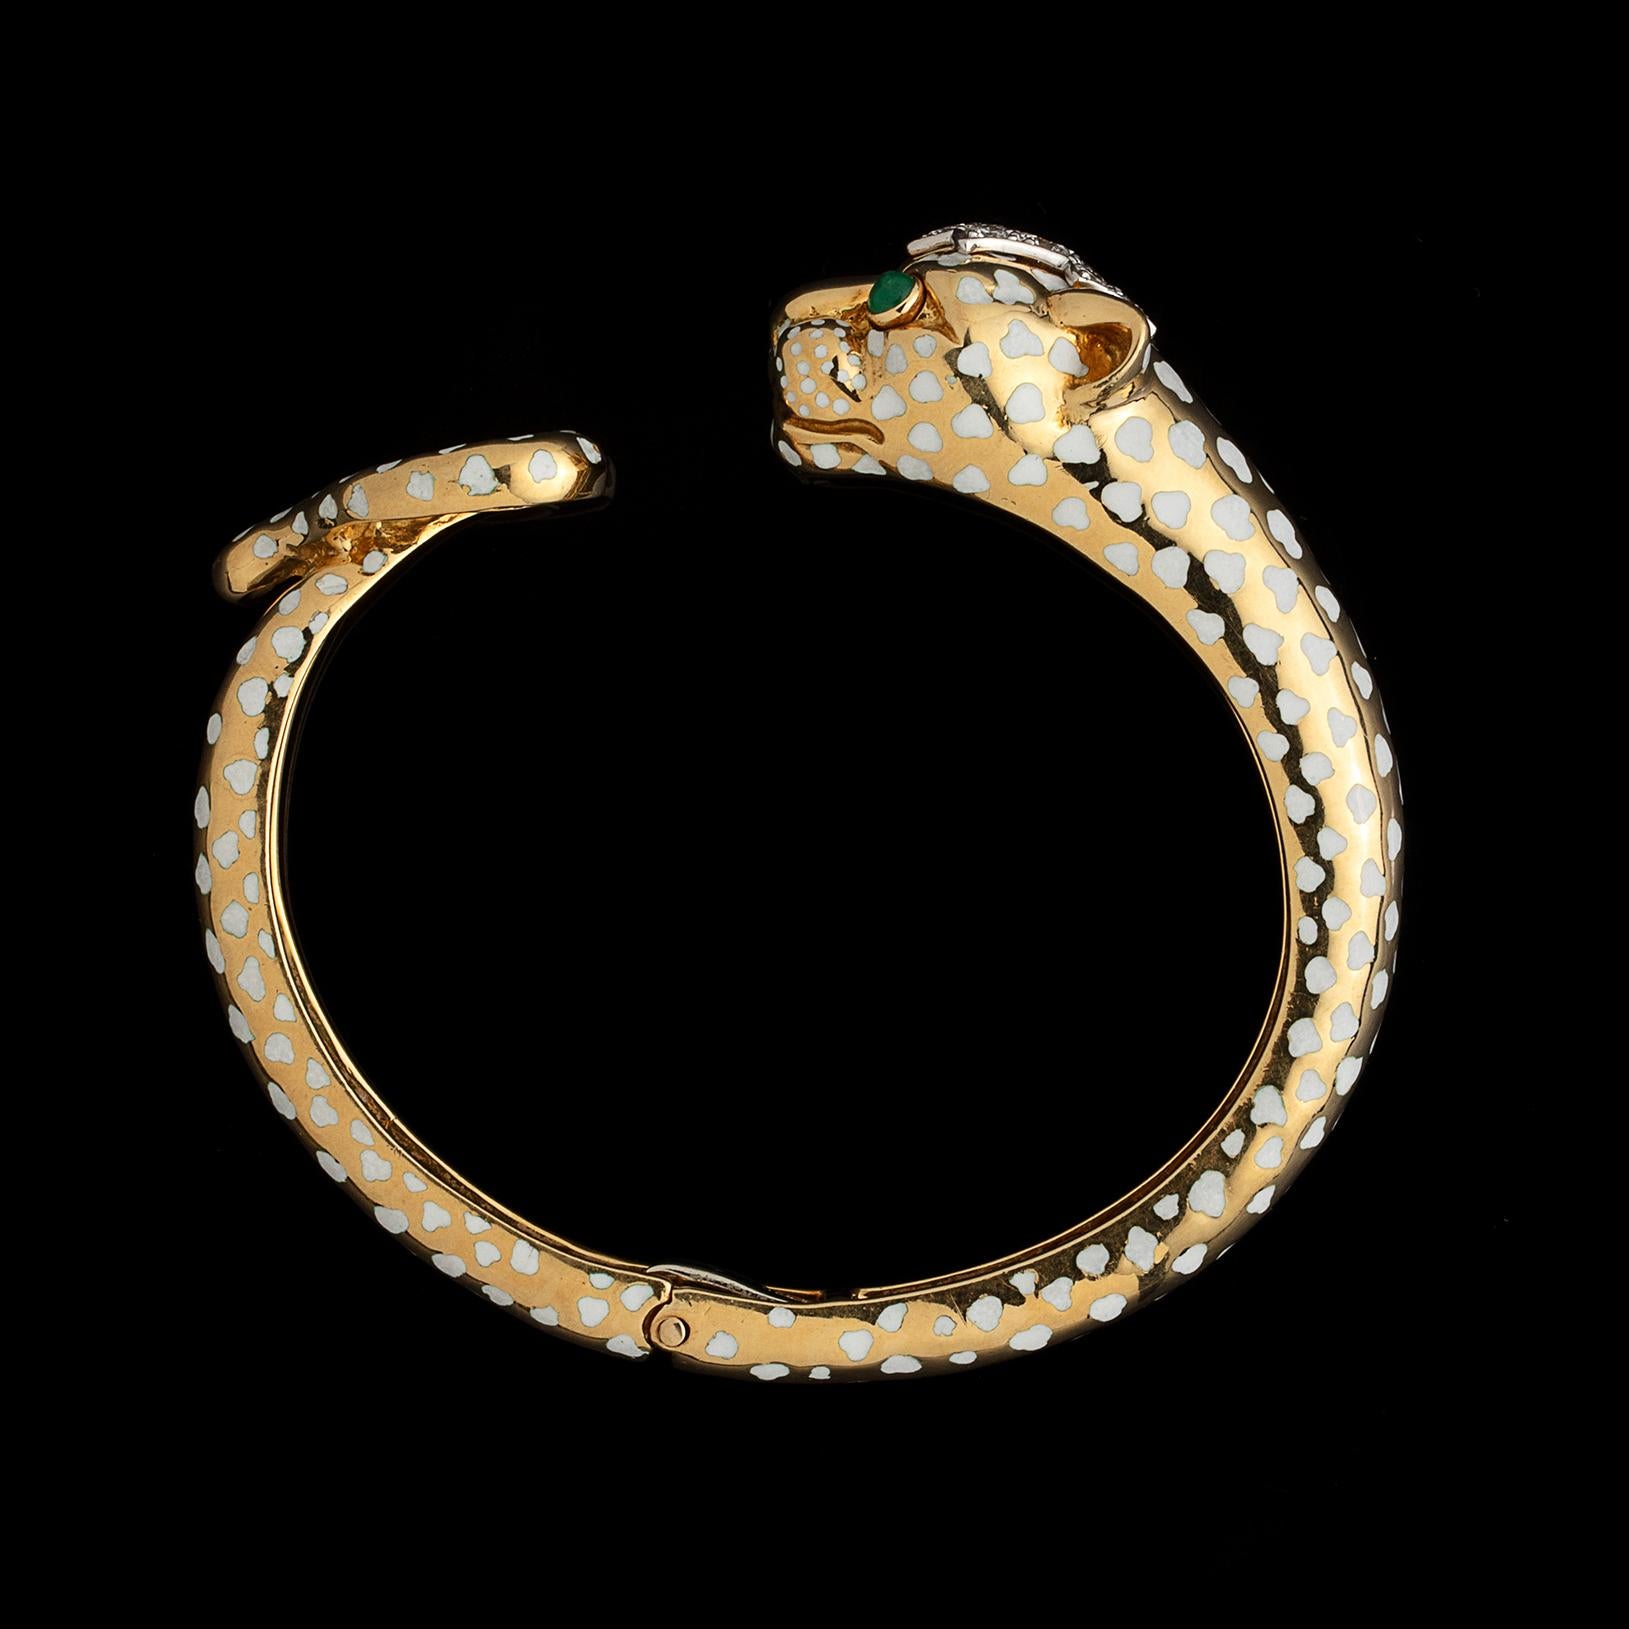 A vintage and rare find from the one and only David Webb! Circa 1980's, this 18k yellow gold David Webb panther bangle bracelet is designed white enamel spots, emerald cabochon eyes, and a head adorned with 8 round brilliant-cut diamonds set in